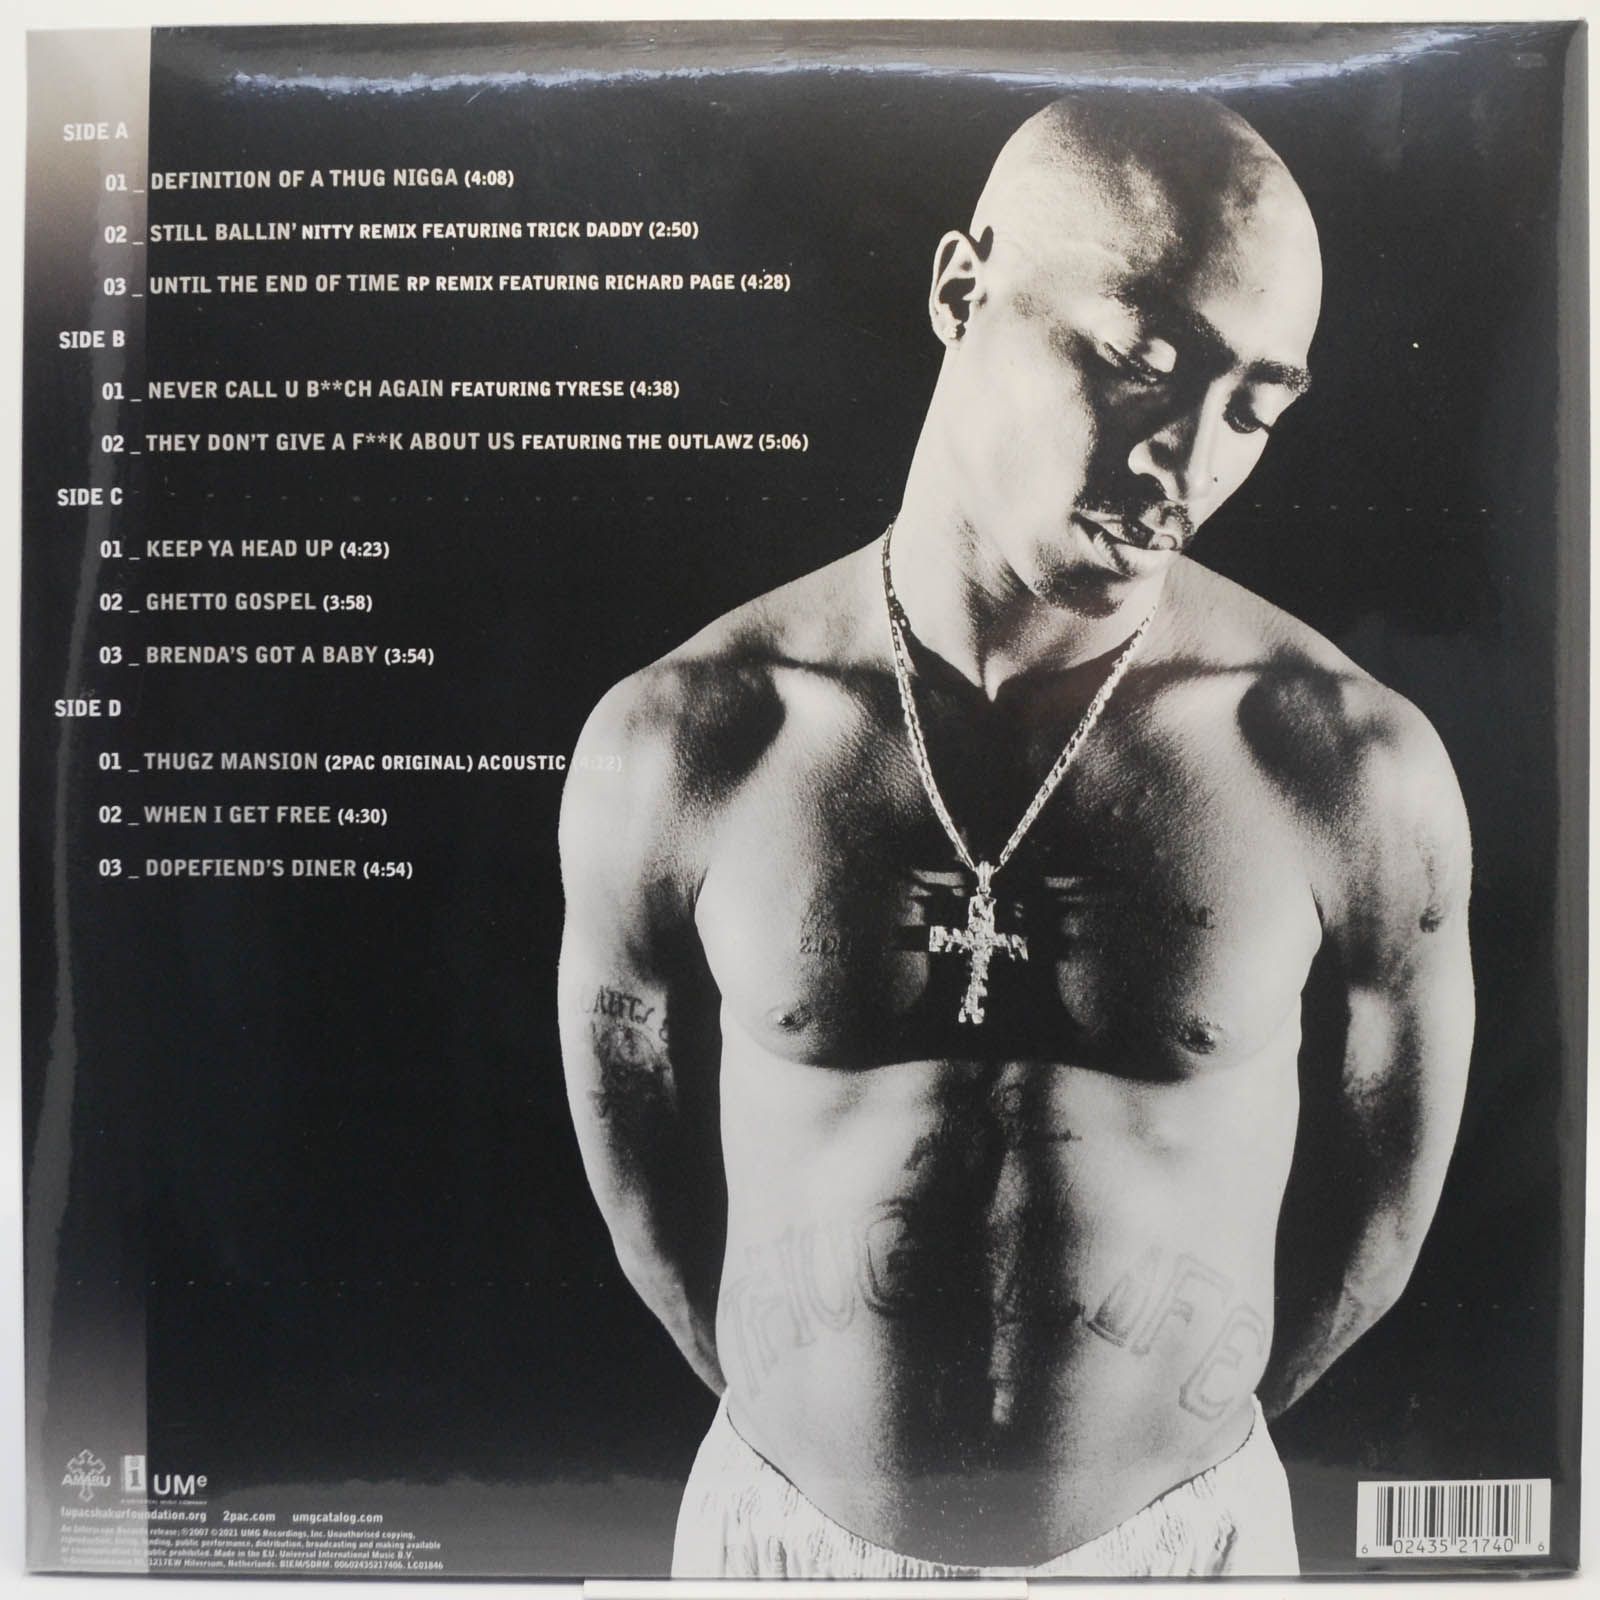 2Pac — The Best Of 2Pac - Part 2: Life (2LP), 2007